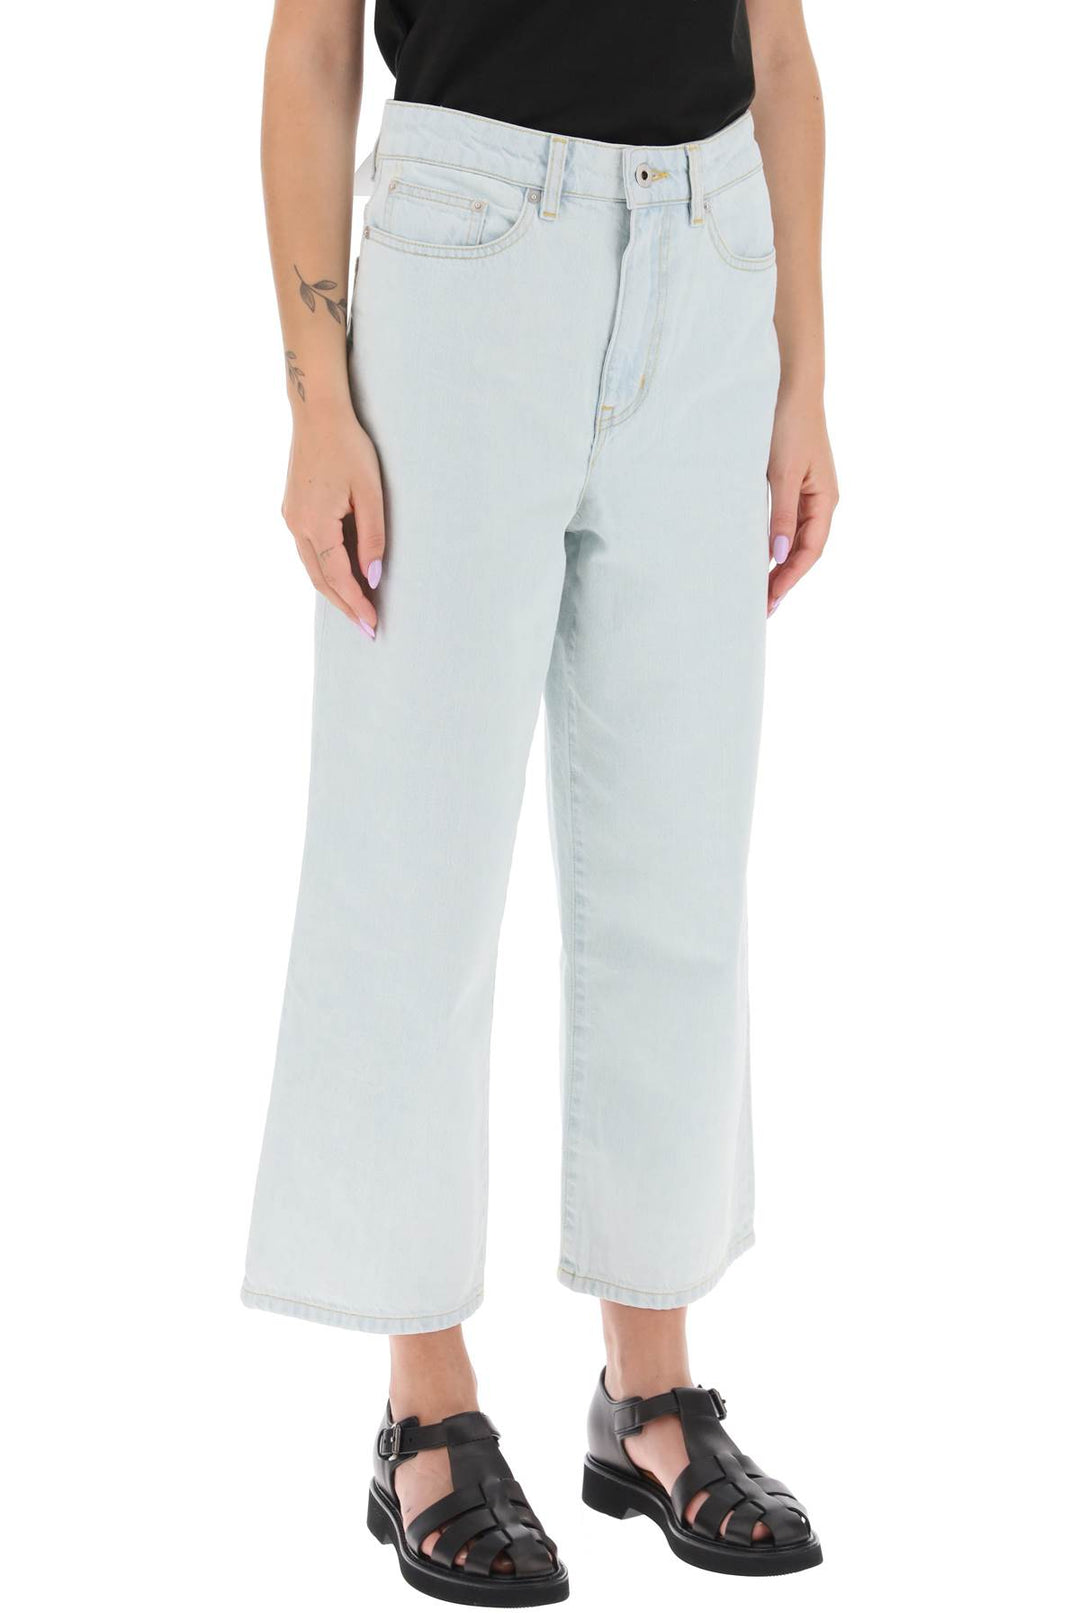 Kenzo 'Sumire' Cropped Jeans With Wide Leg   Celeste